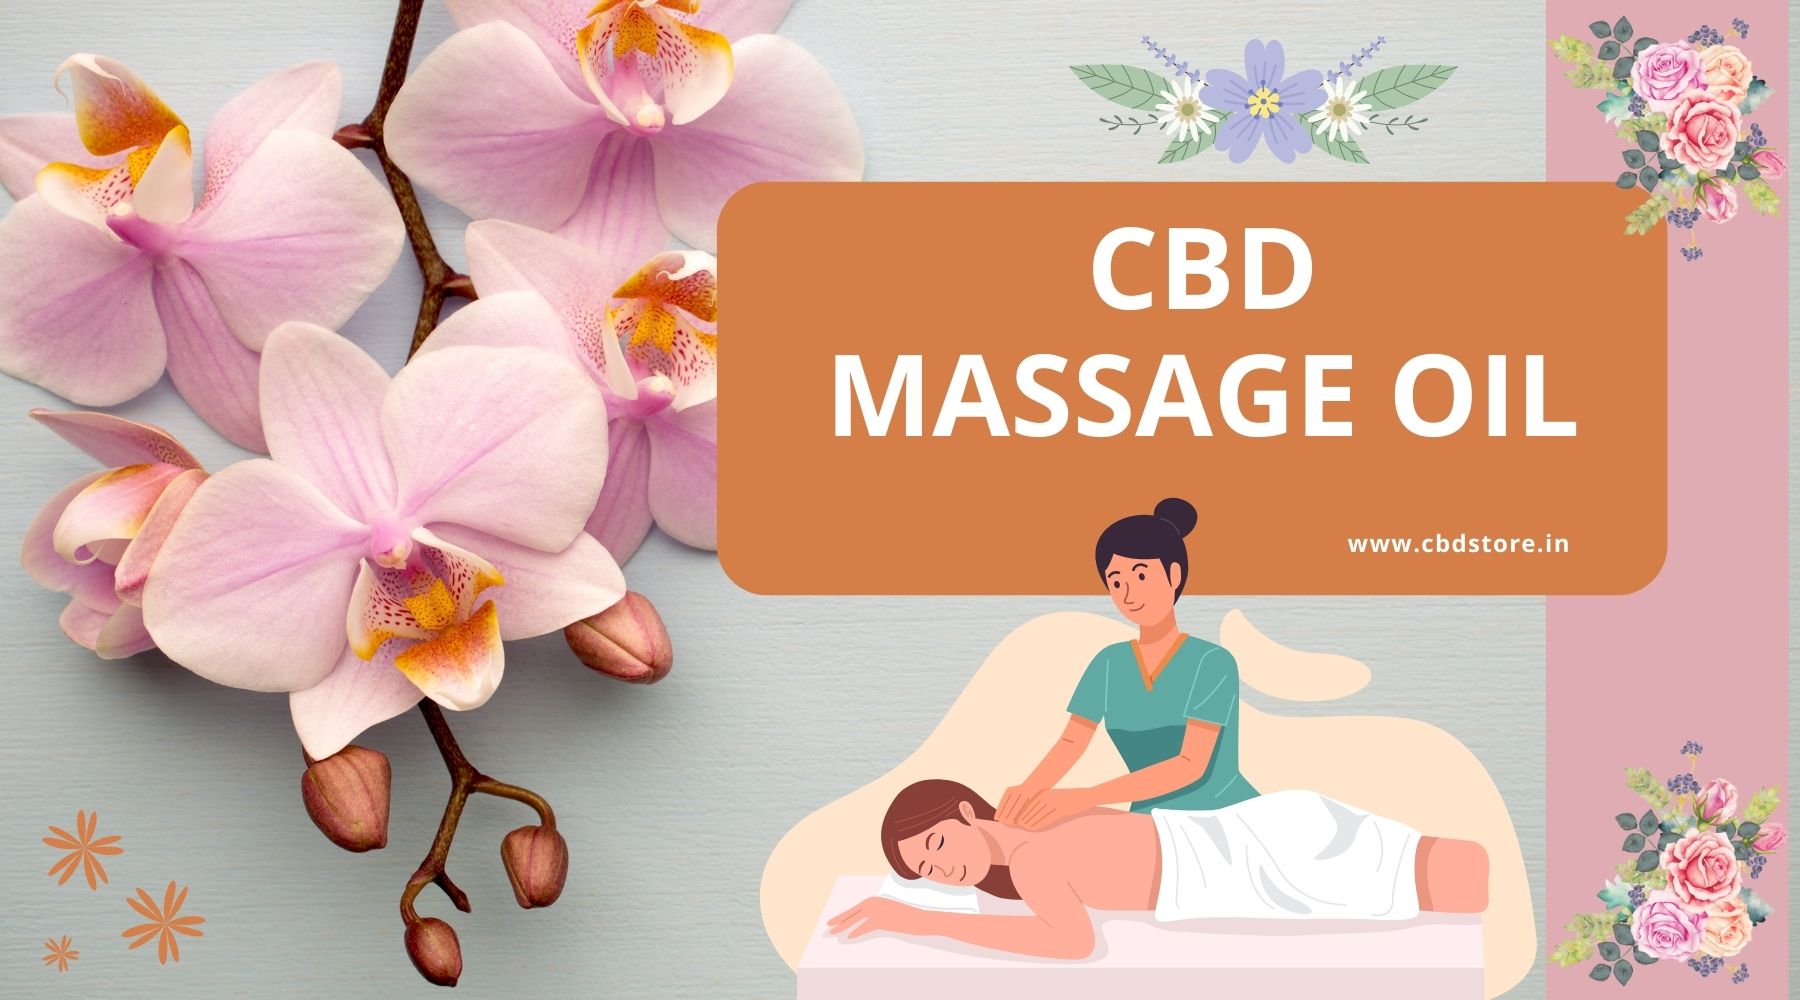 Yes, your massage experience can get better - with CBD massage oil! - CBD Store India